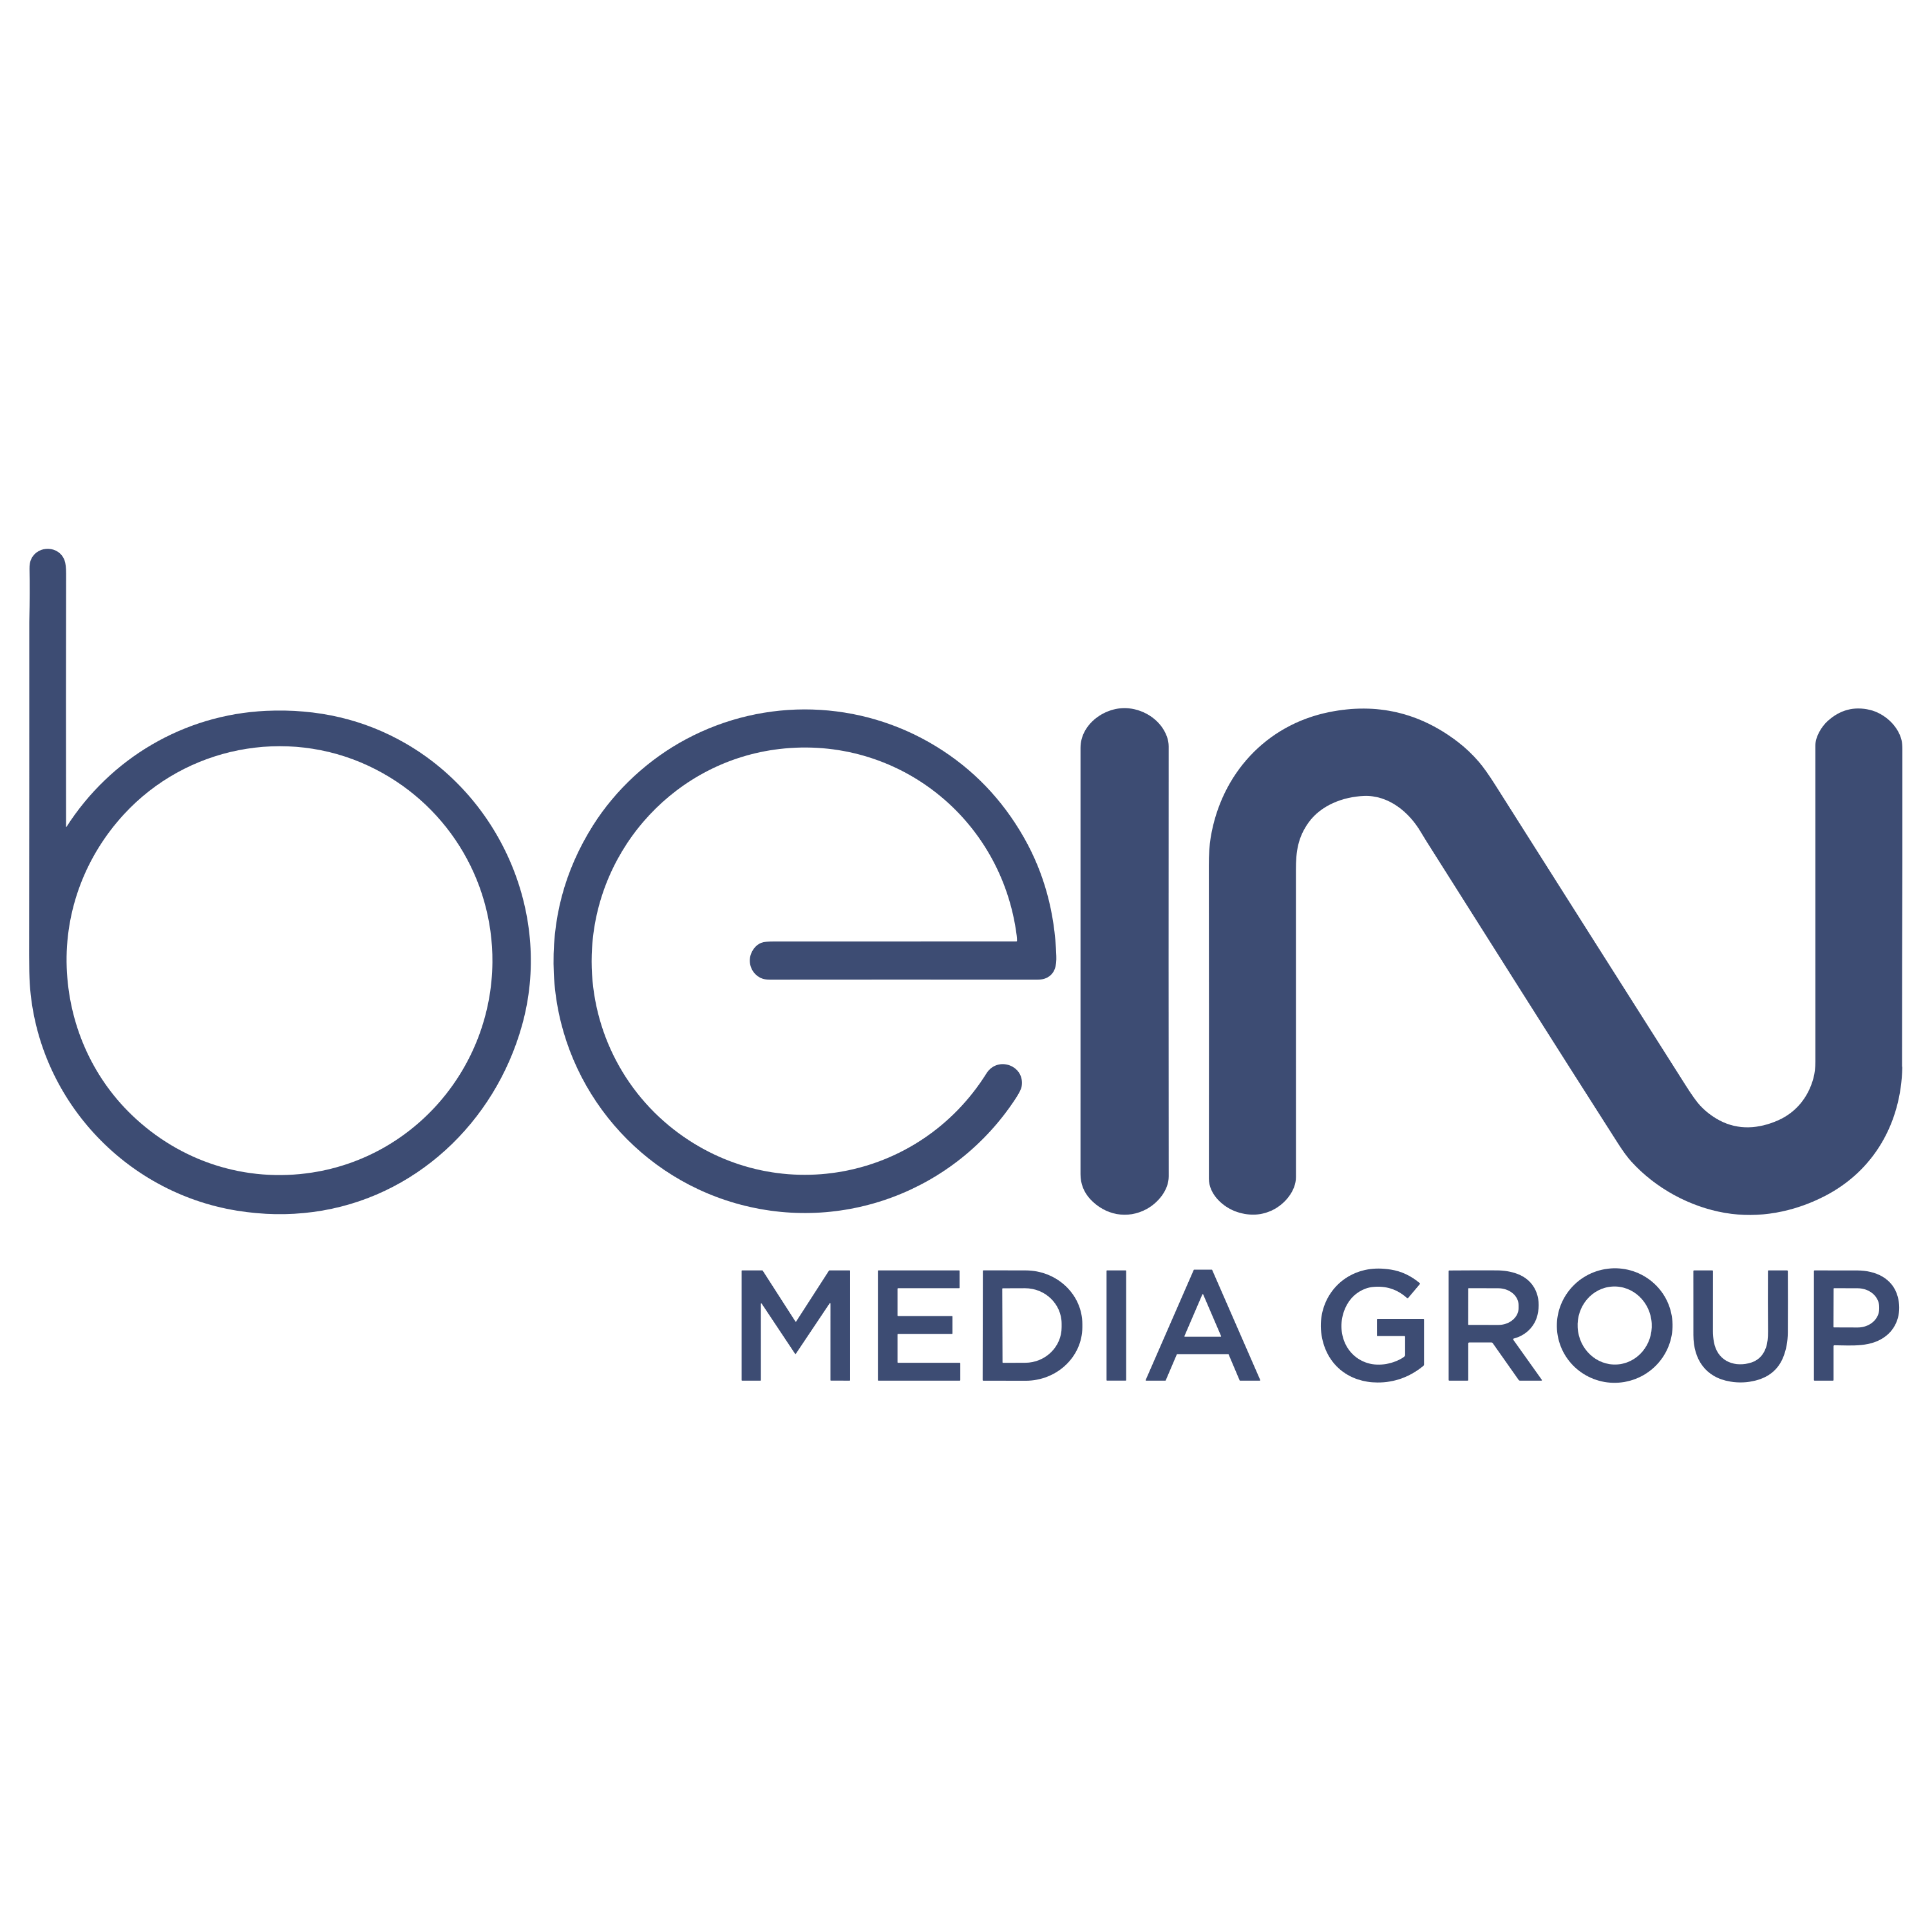 Bein Mediagroup Logo Transparent Picture